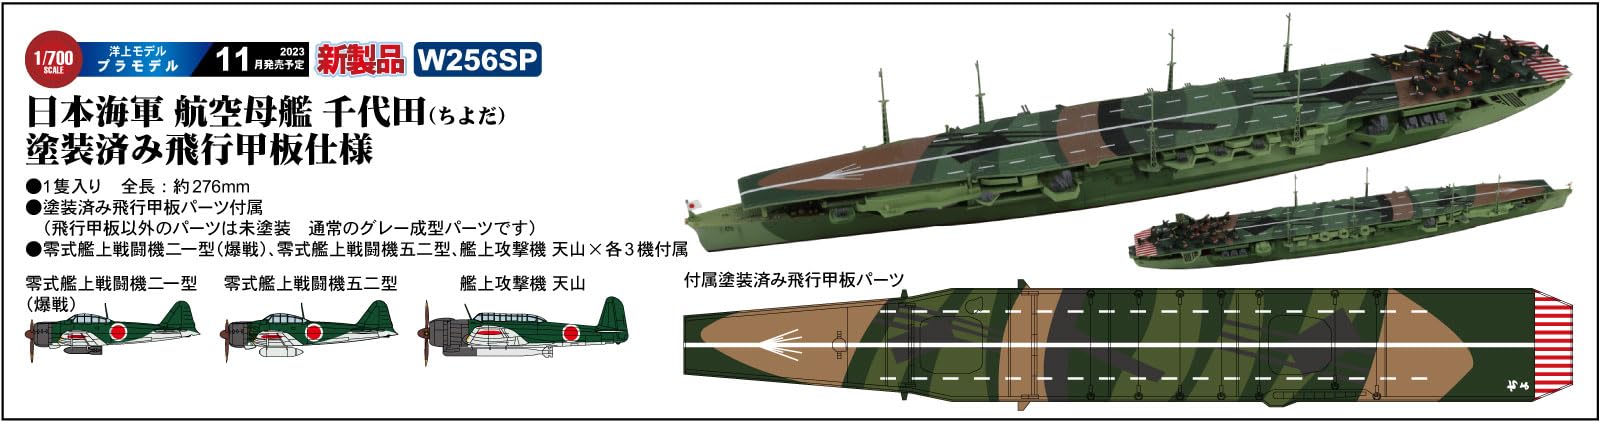 Pit-Road 1/700 Skywave Series Japanese Navy Aircraft Carrier Chiyoda Painted Flight Deck Spec Specification Model W256Sp